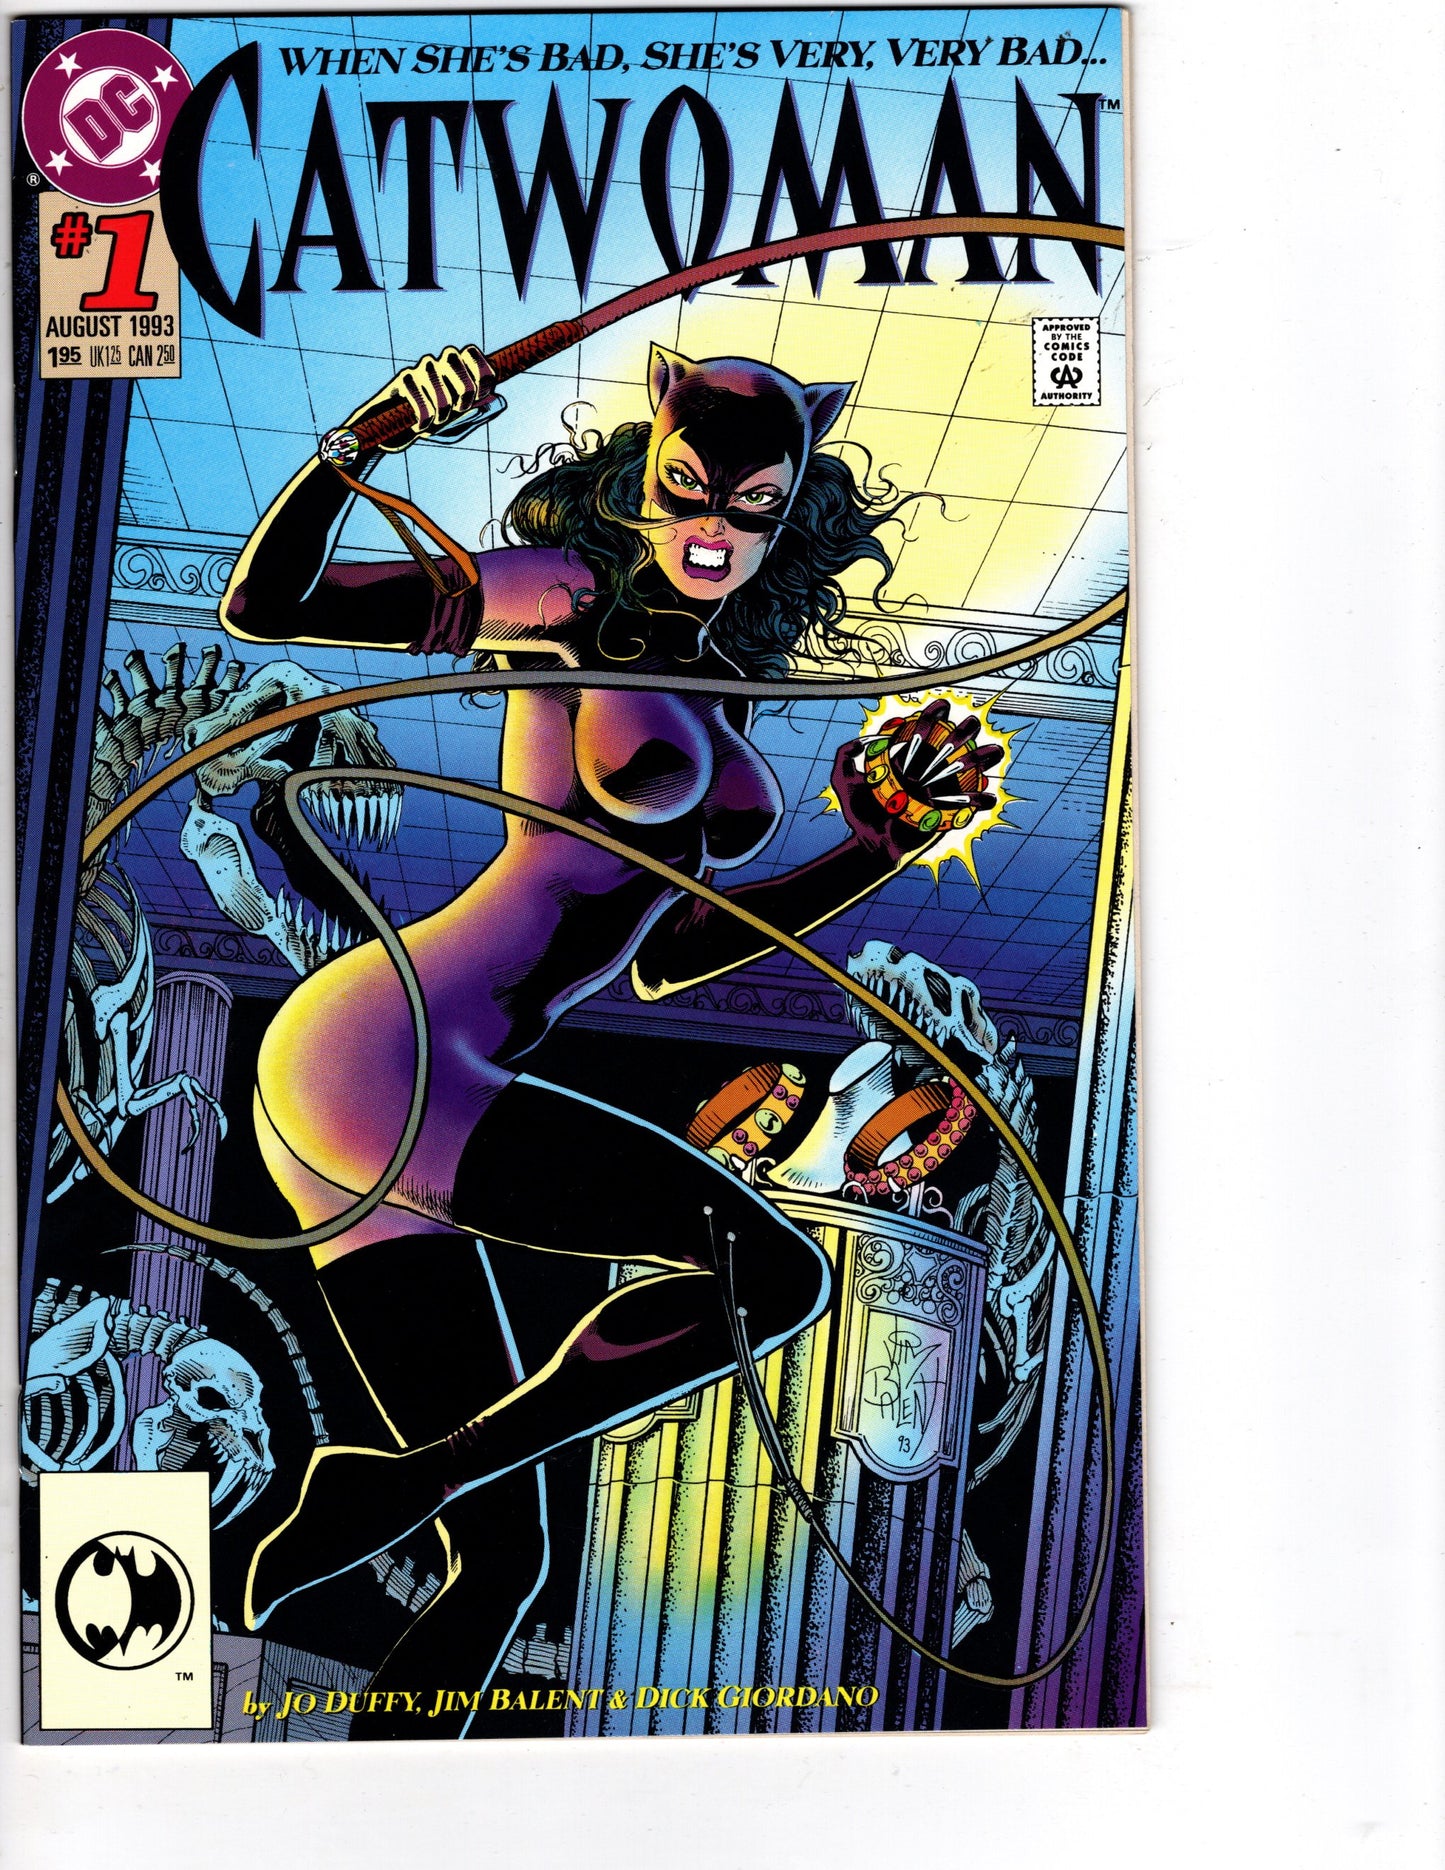 Catwoman 1